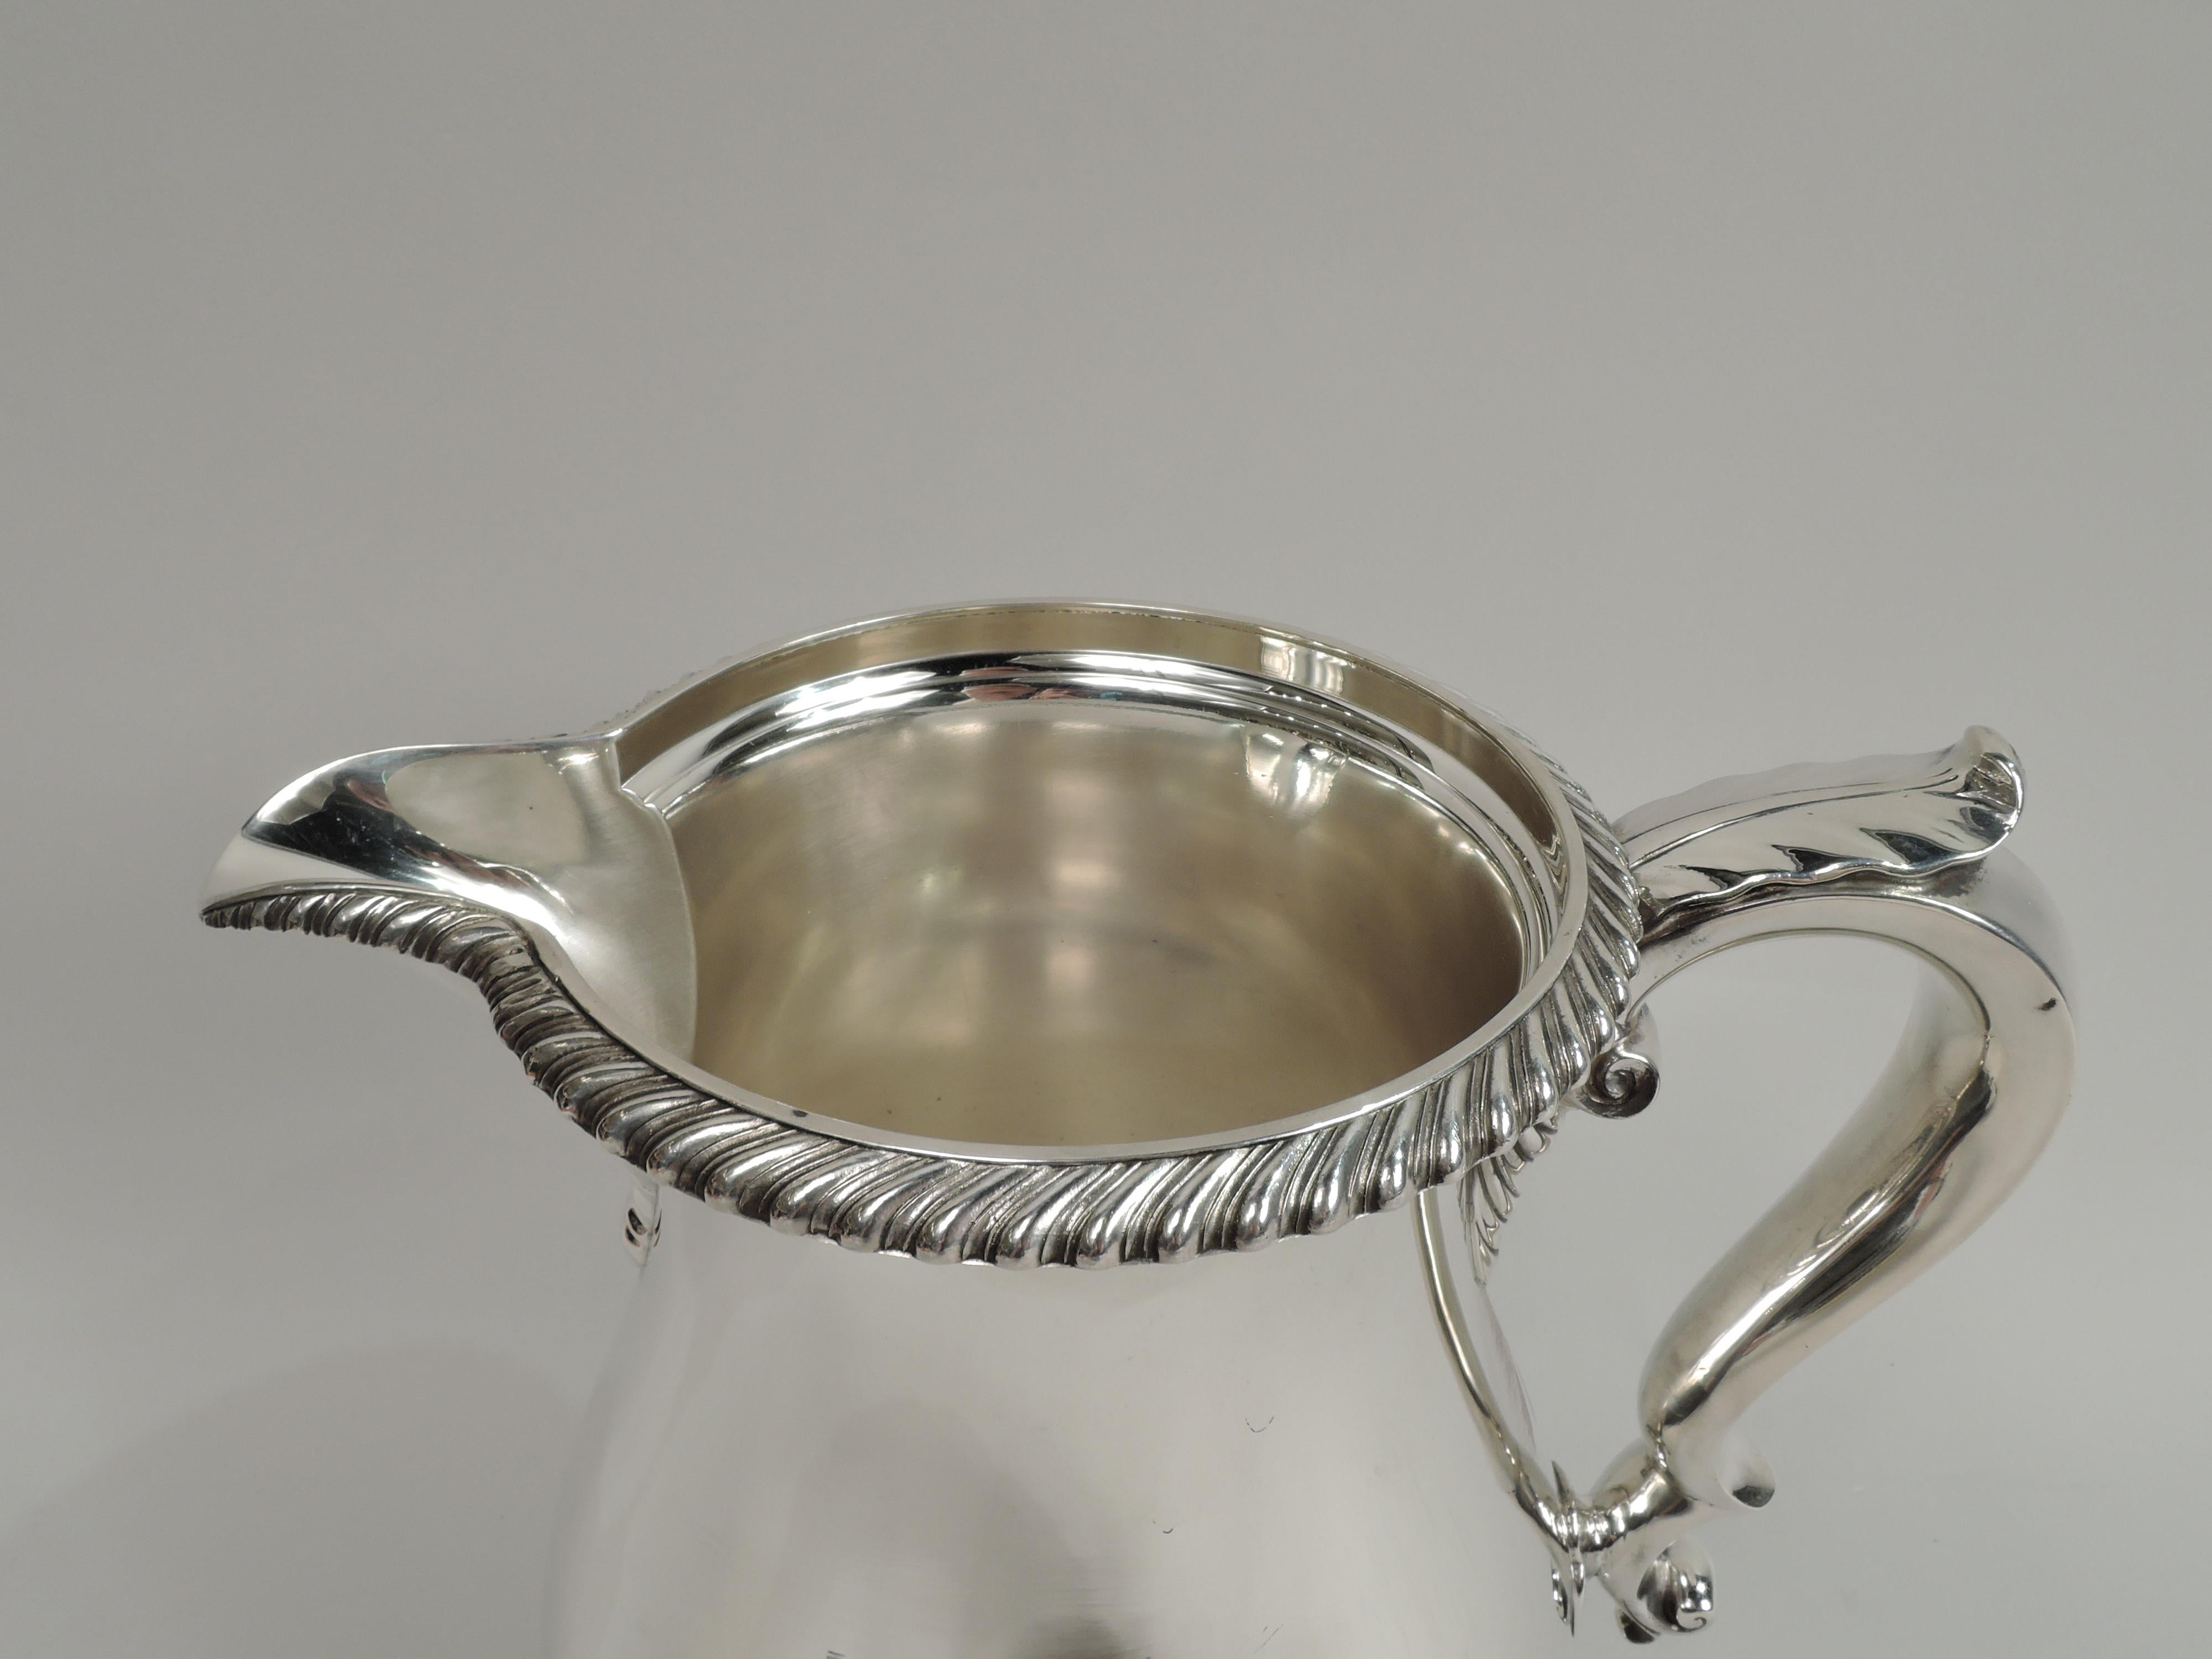 Kensington sterling silver water pitcher. Made by Gorham in Providence in 1947. Baluster with leaf-capped double-scroll handle, v-lip spout, and round and stepped foot. Gadrooned rim. Traditional Georgian with nice heft. Fully marked including